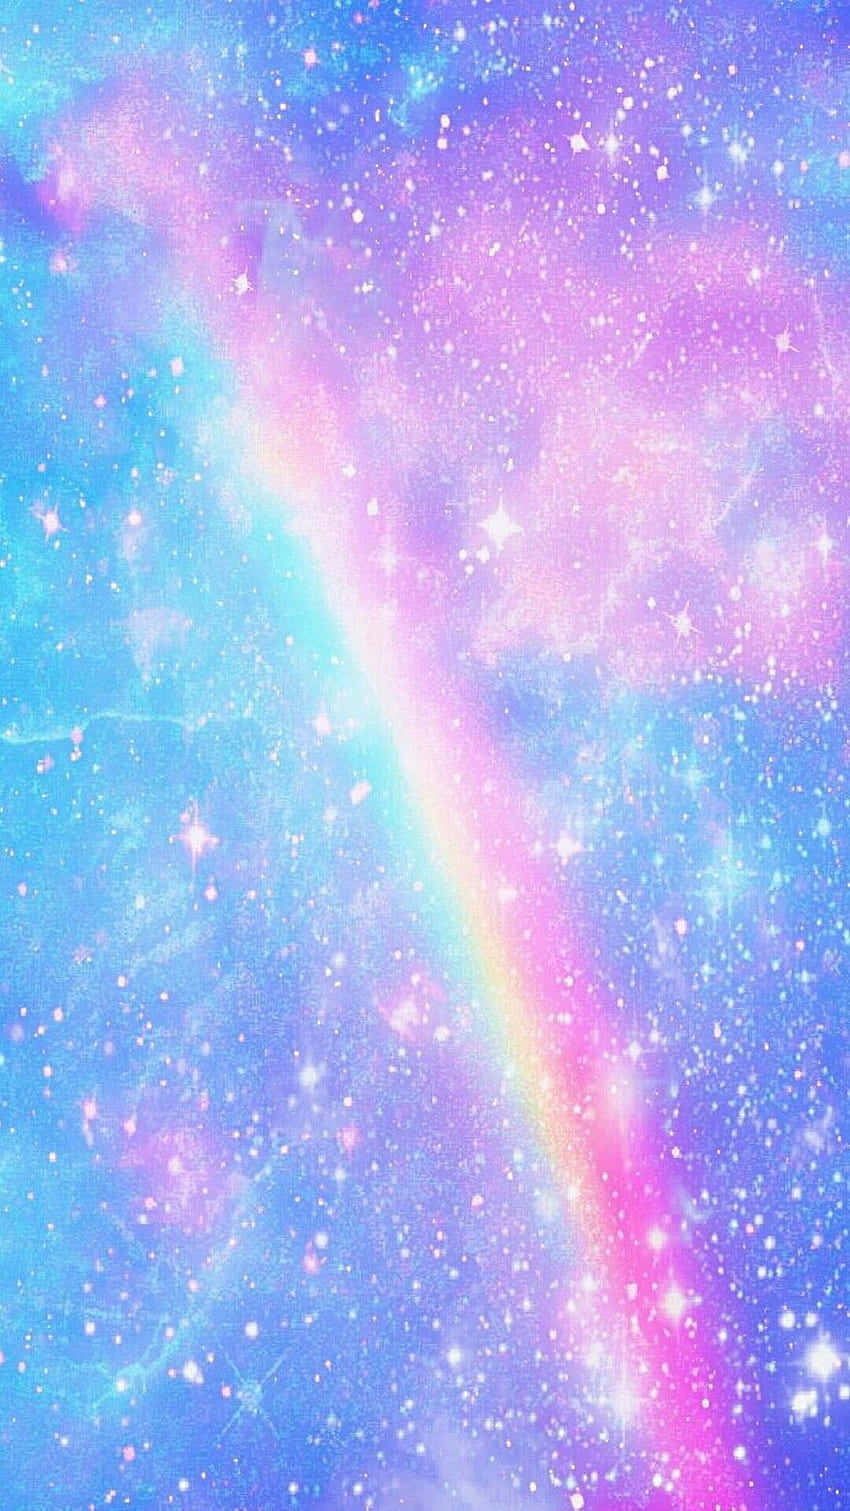 Turn your phone into a pop of color with this pastel rainbow iphone wallpaper! Wallpaper